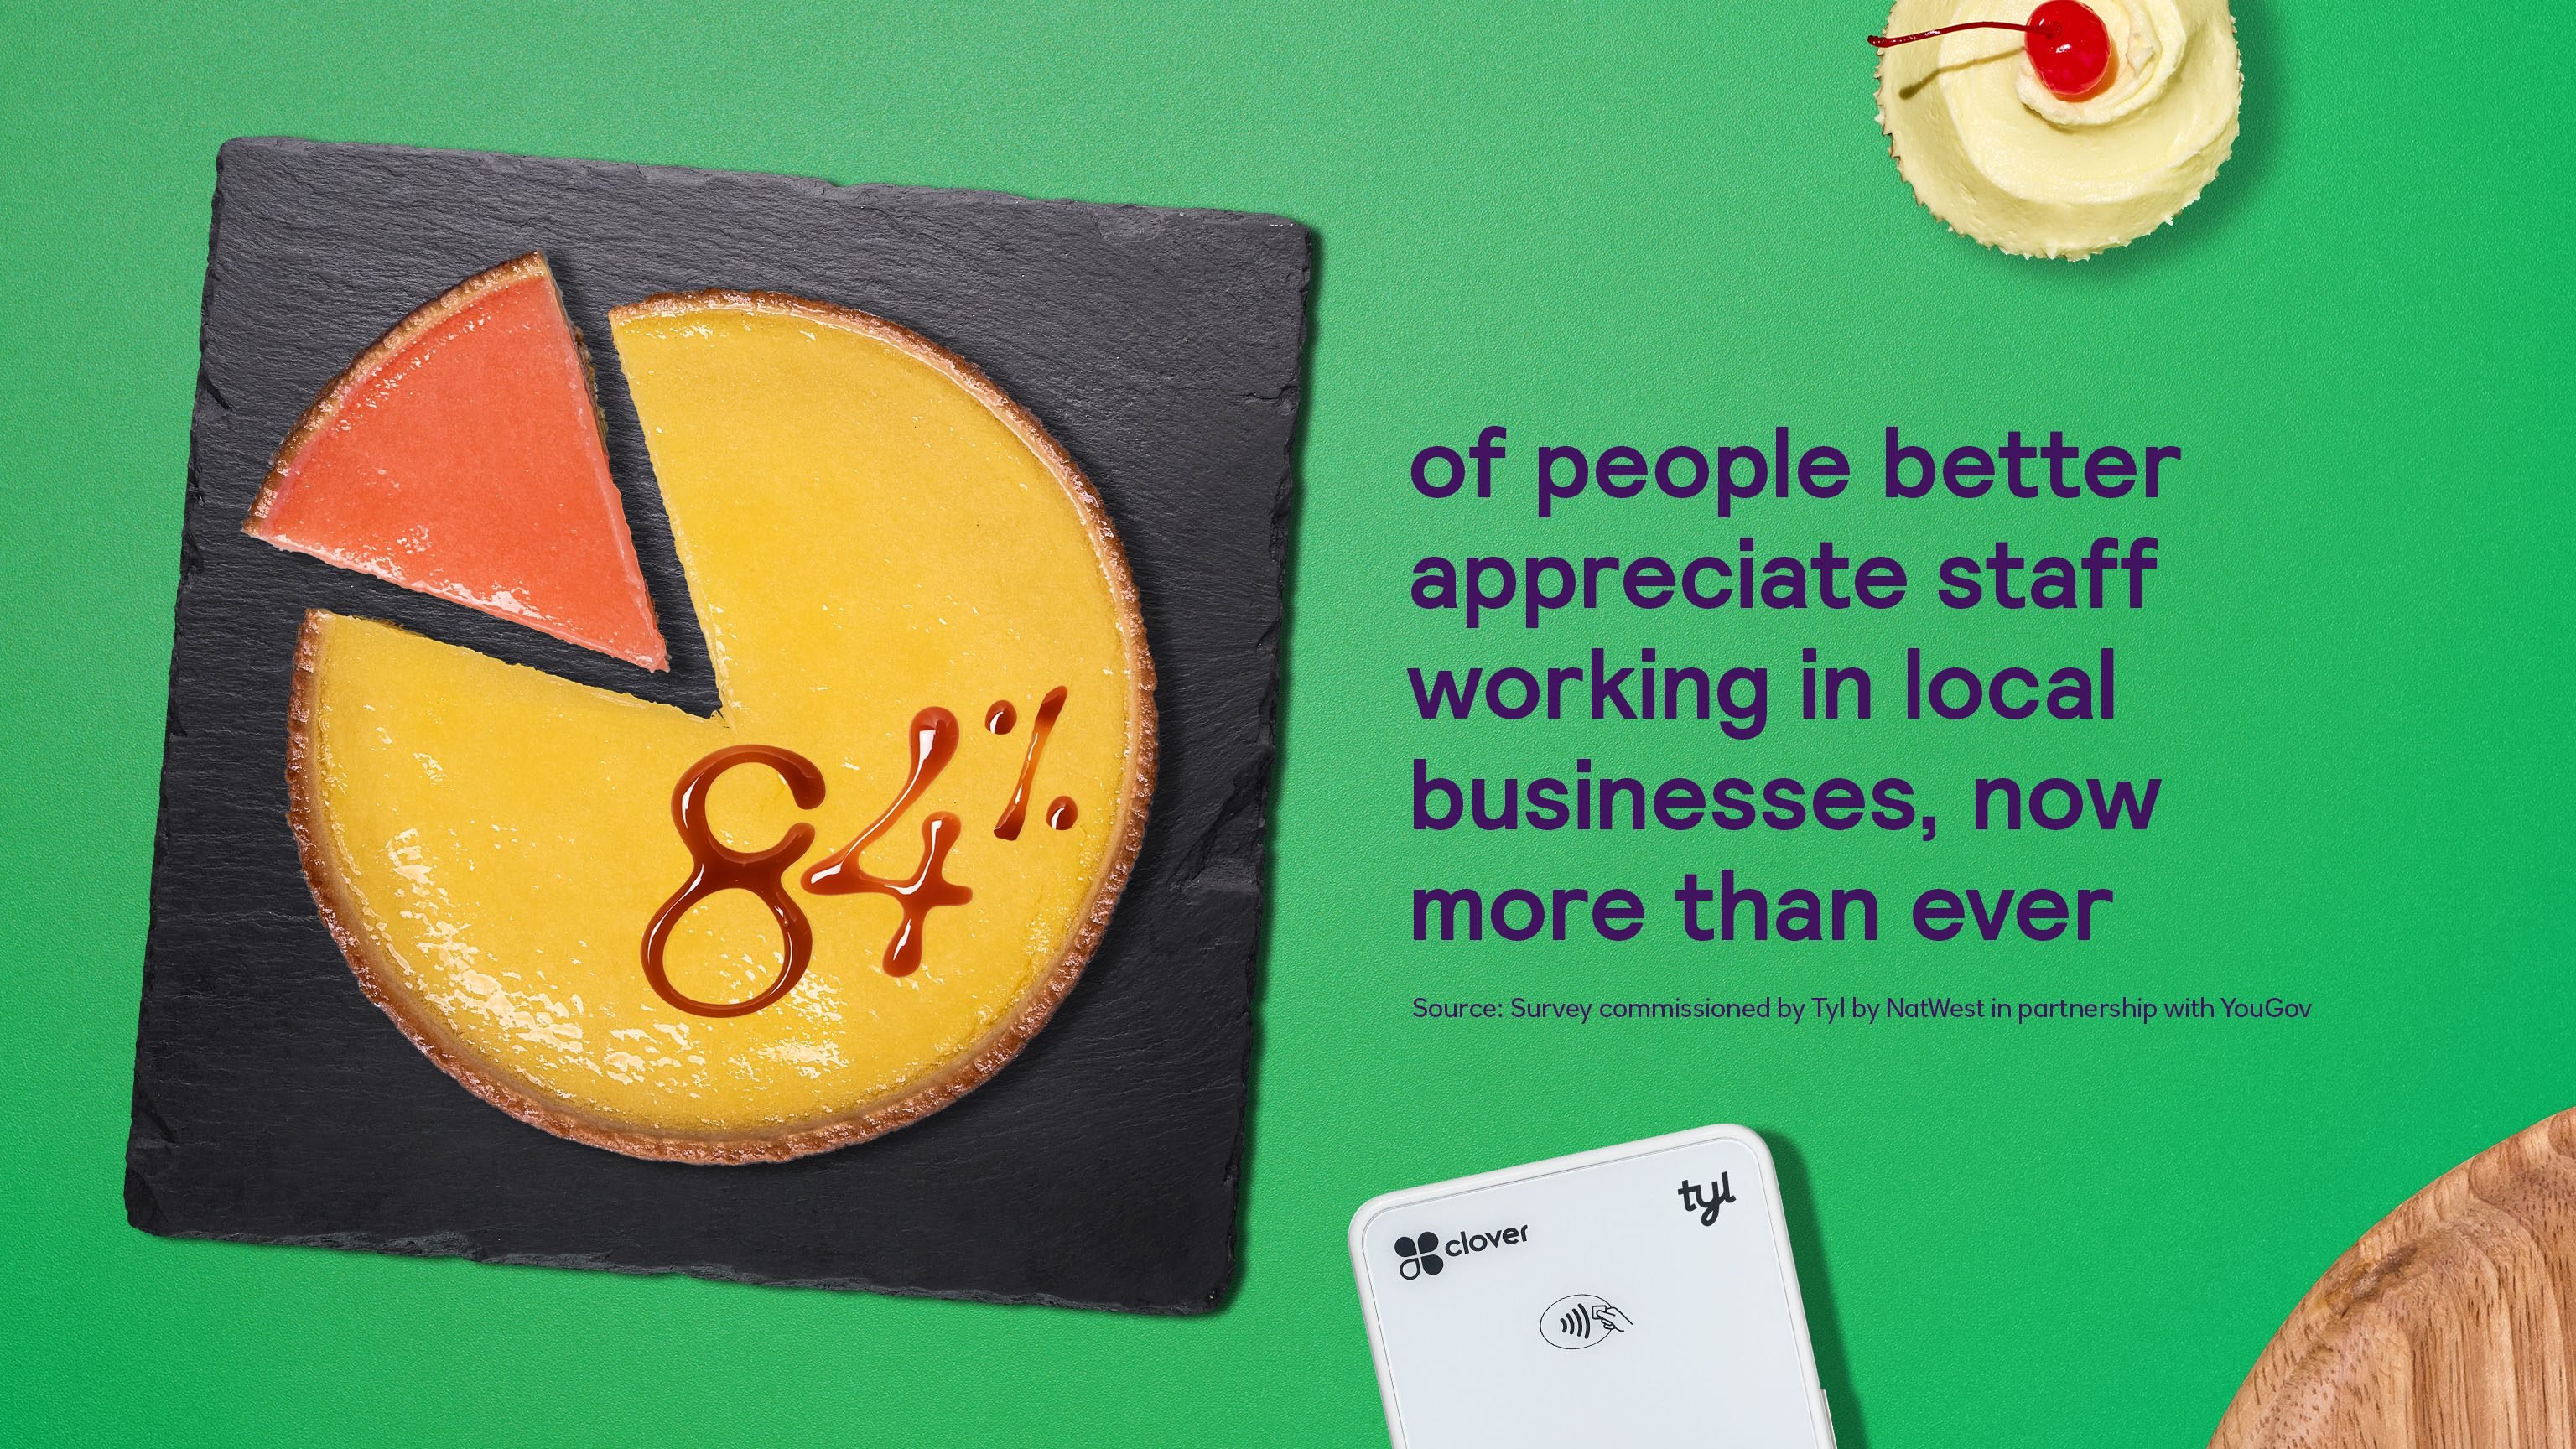 84% of people appreciate staff working in local businesses